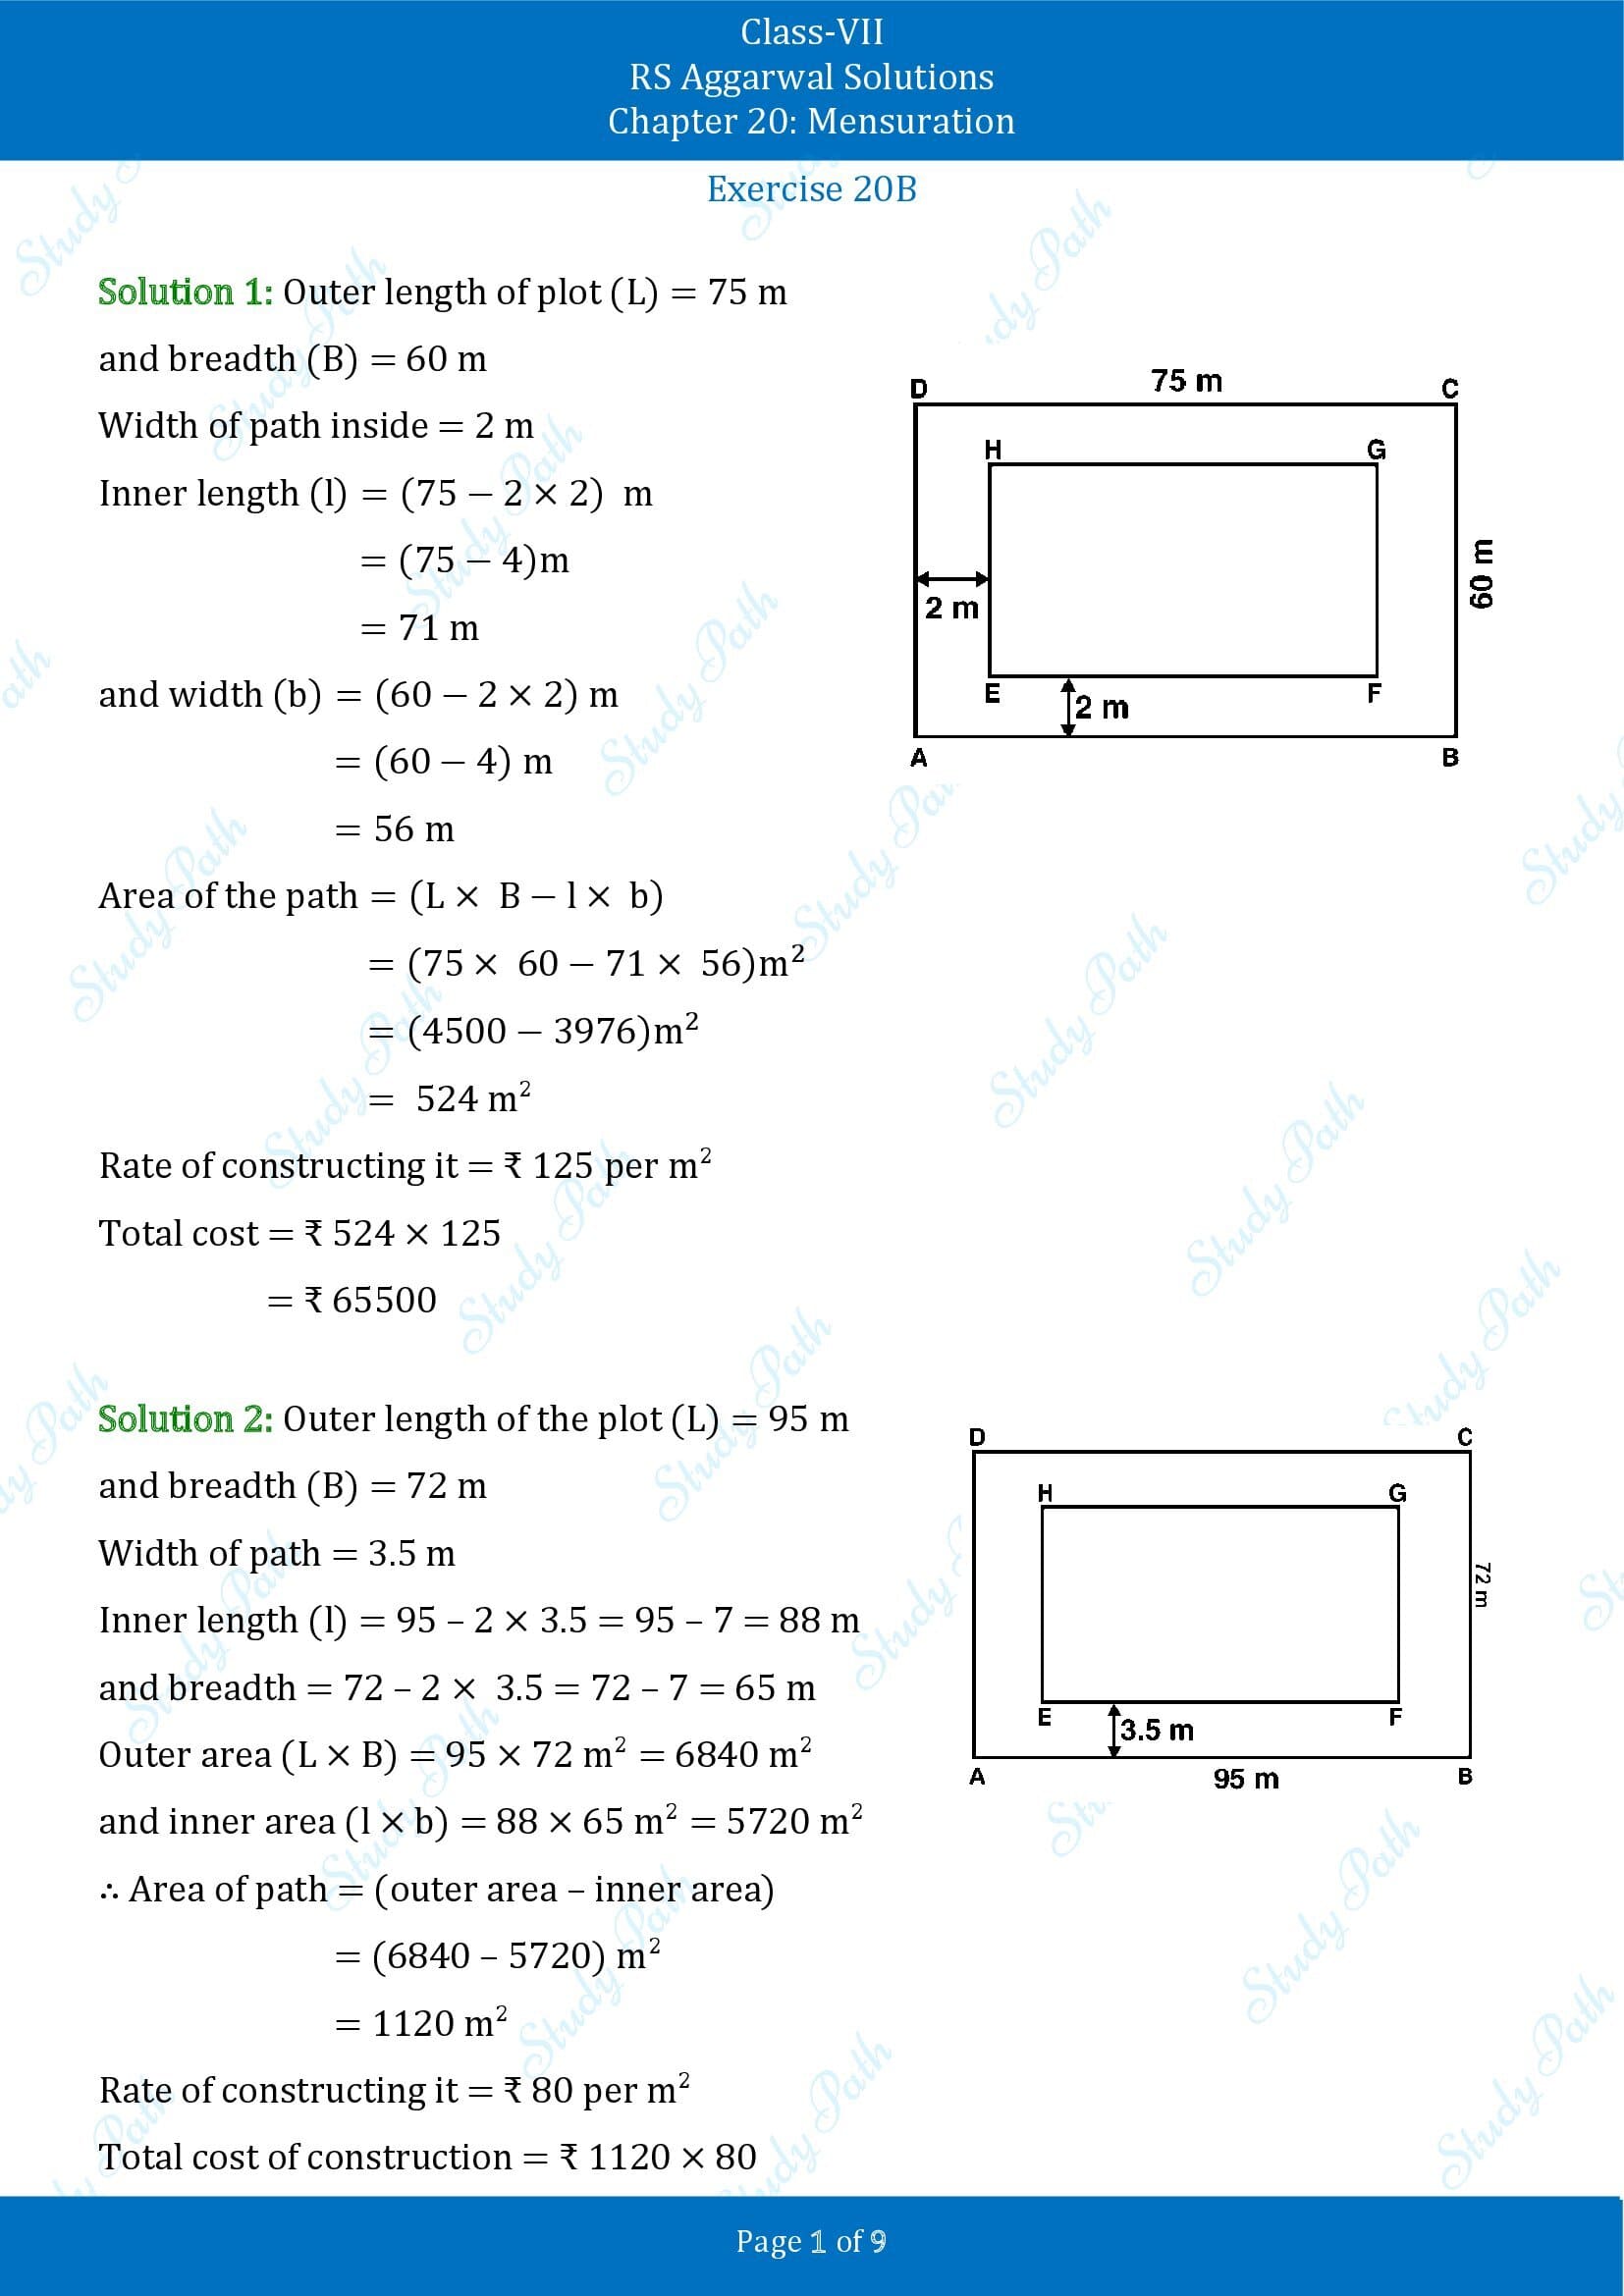 RS Aggarwal Solutions Class 7 Chapter 20 Mensuration Exercise 20B 00001